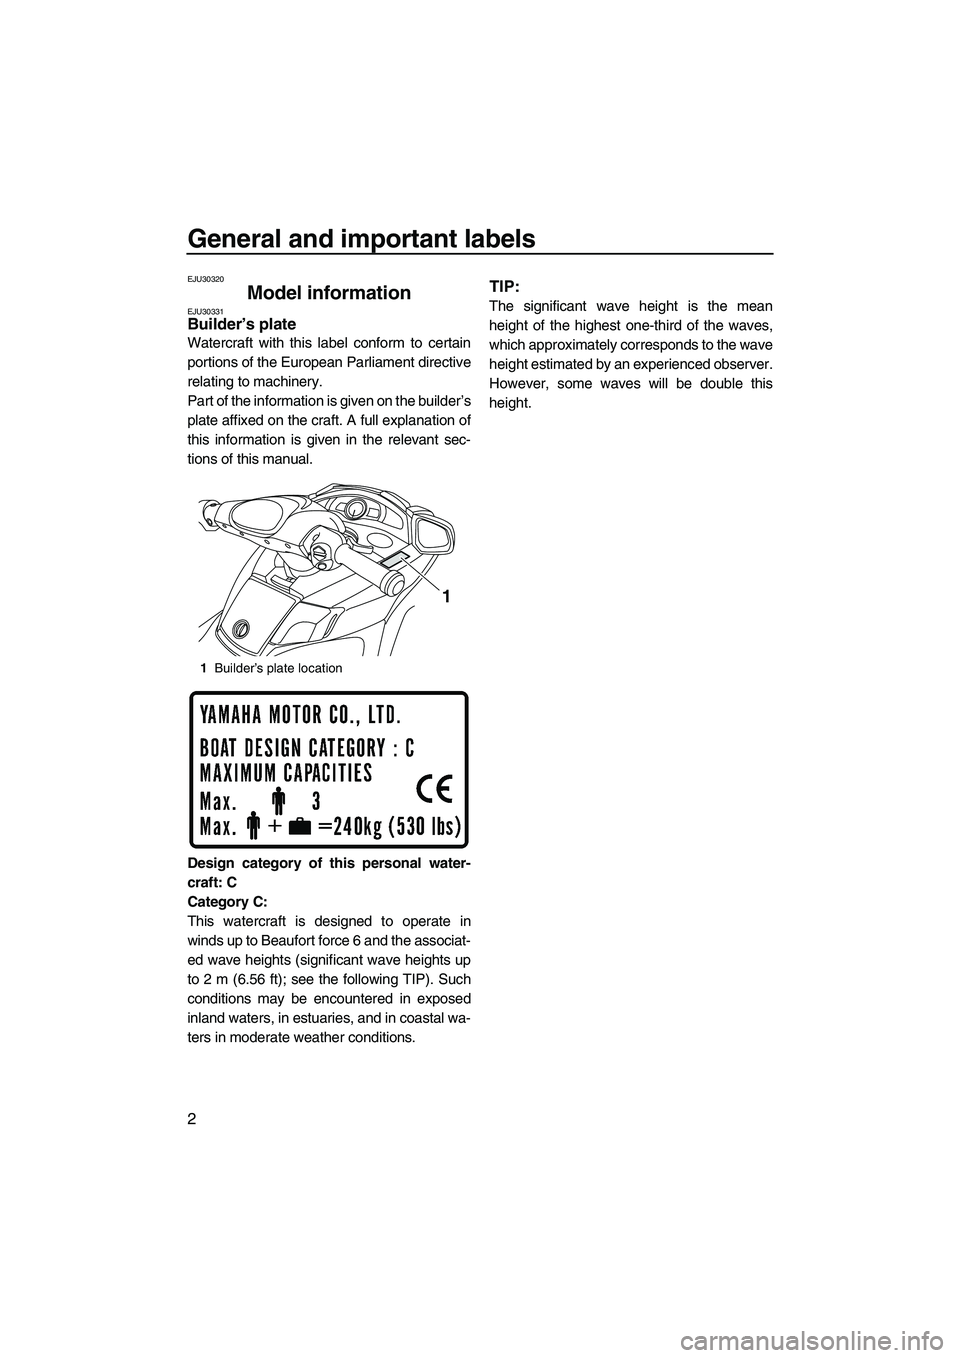 YAMAHA SVHO 2011  Owners Manual General and important labels
2
EJU30320
Model information EJU30331Builder’s plate 
Watercraft with this label conform to certain
portions of the European Parliament directive
relating to machinery.
